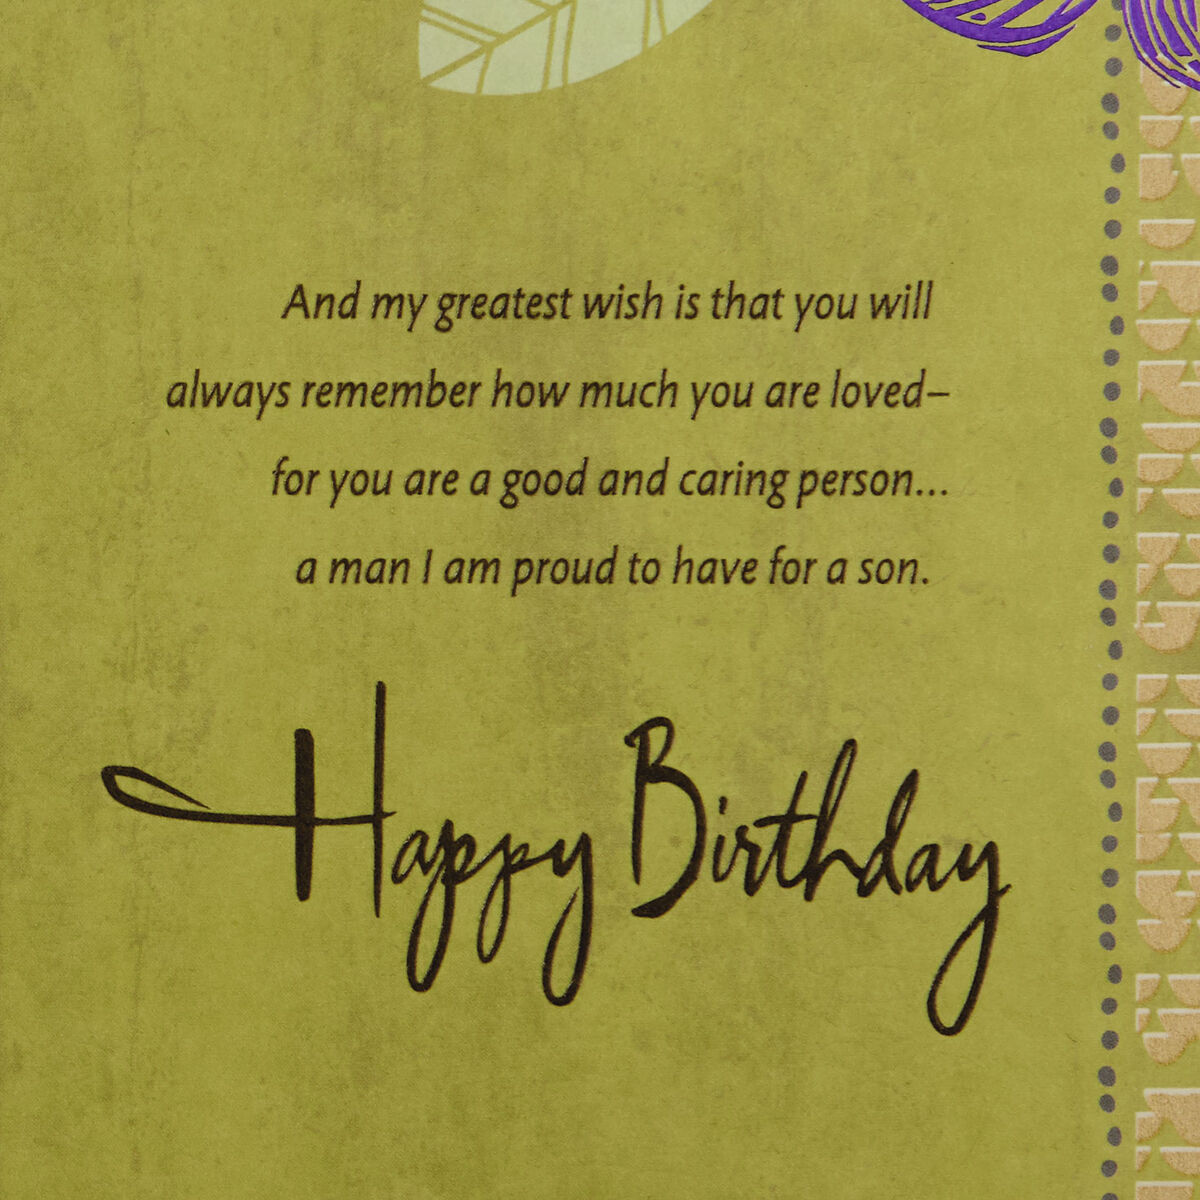 Wishes from My Heart Birthday Card for Son - Greeting Cards - Hallmark